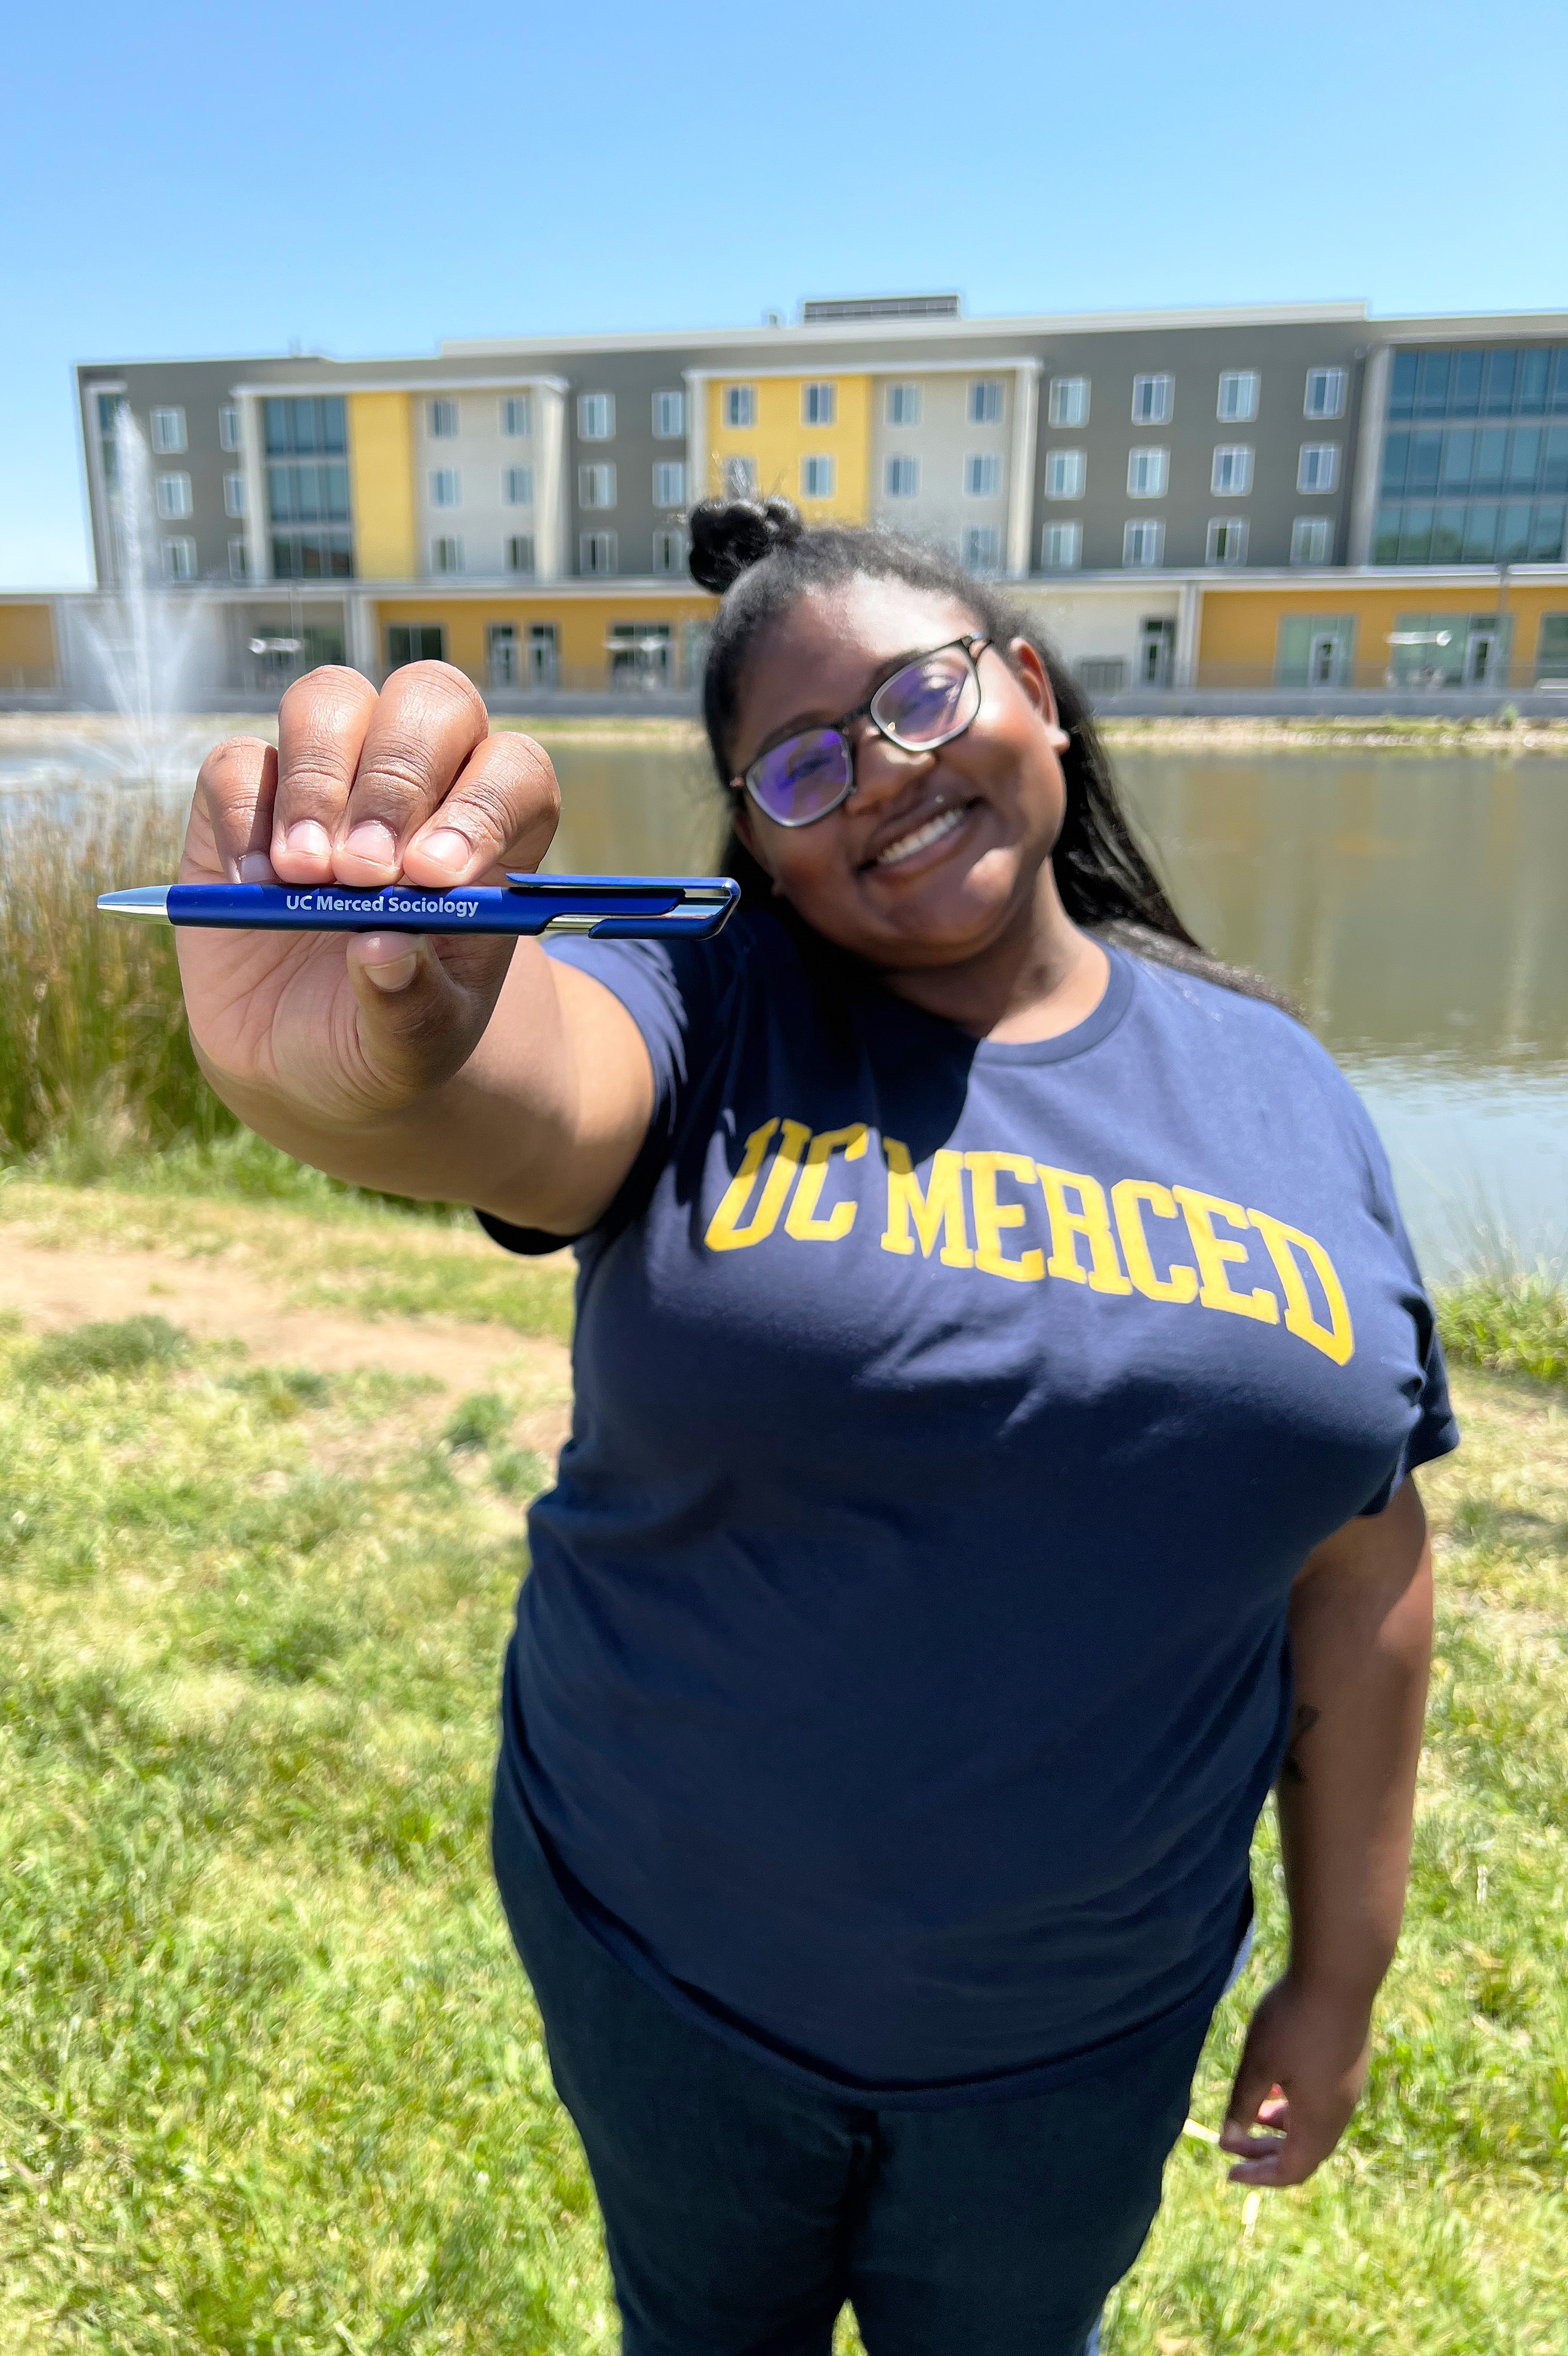 Isabella Mitchell poses for a photo at UC Merced.